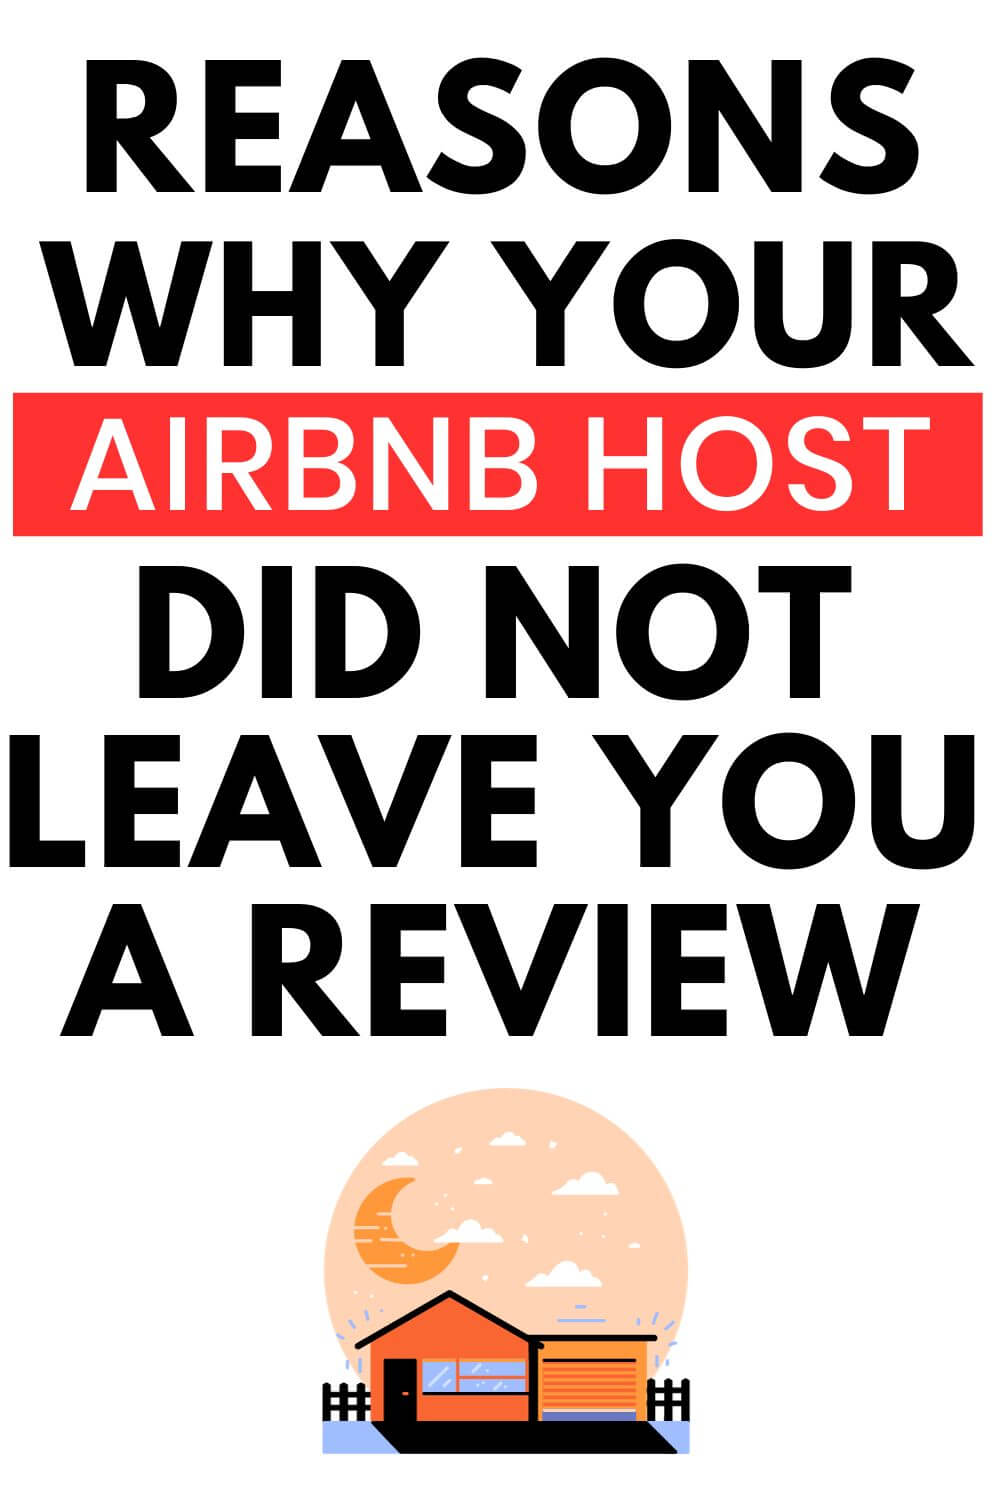 Getting Reviews at an AIrbnb